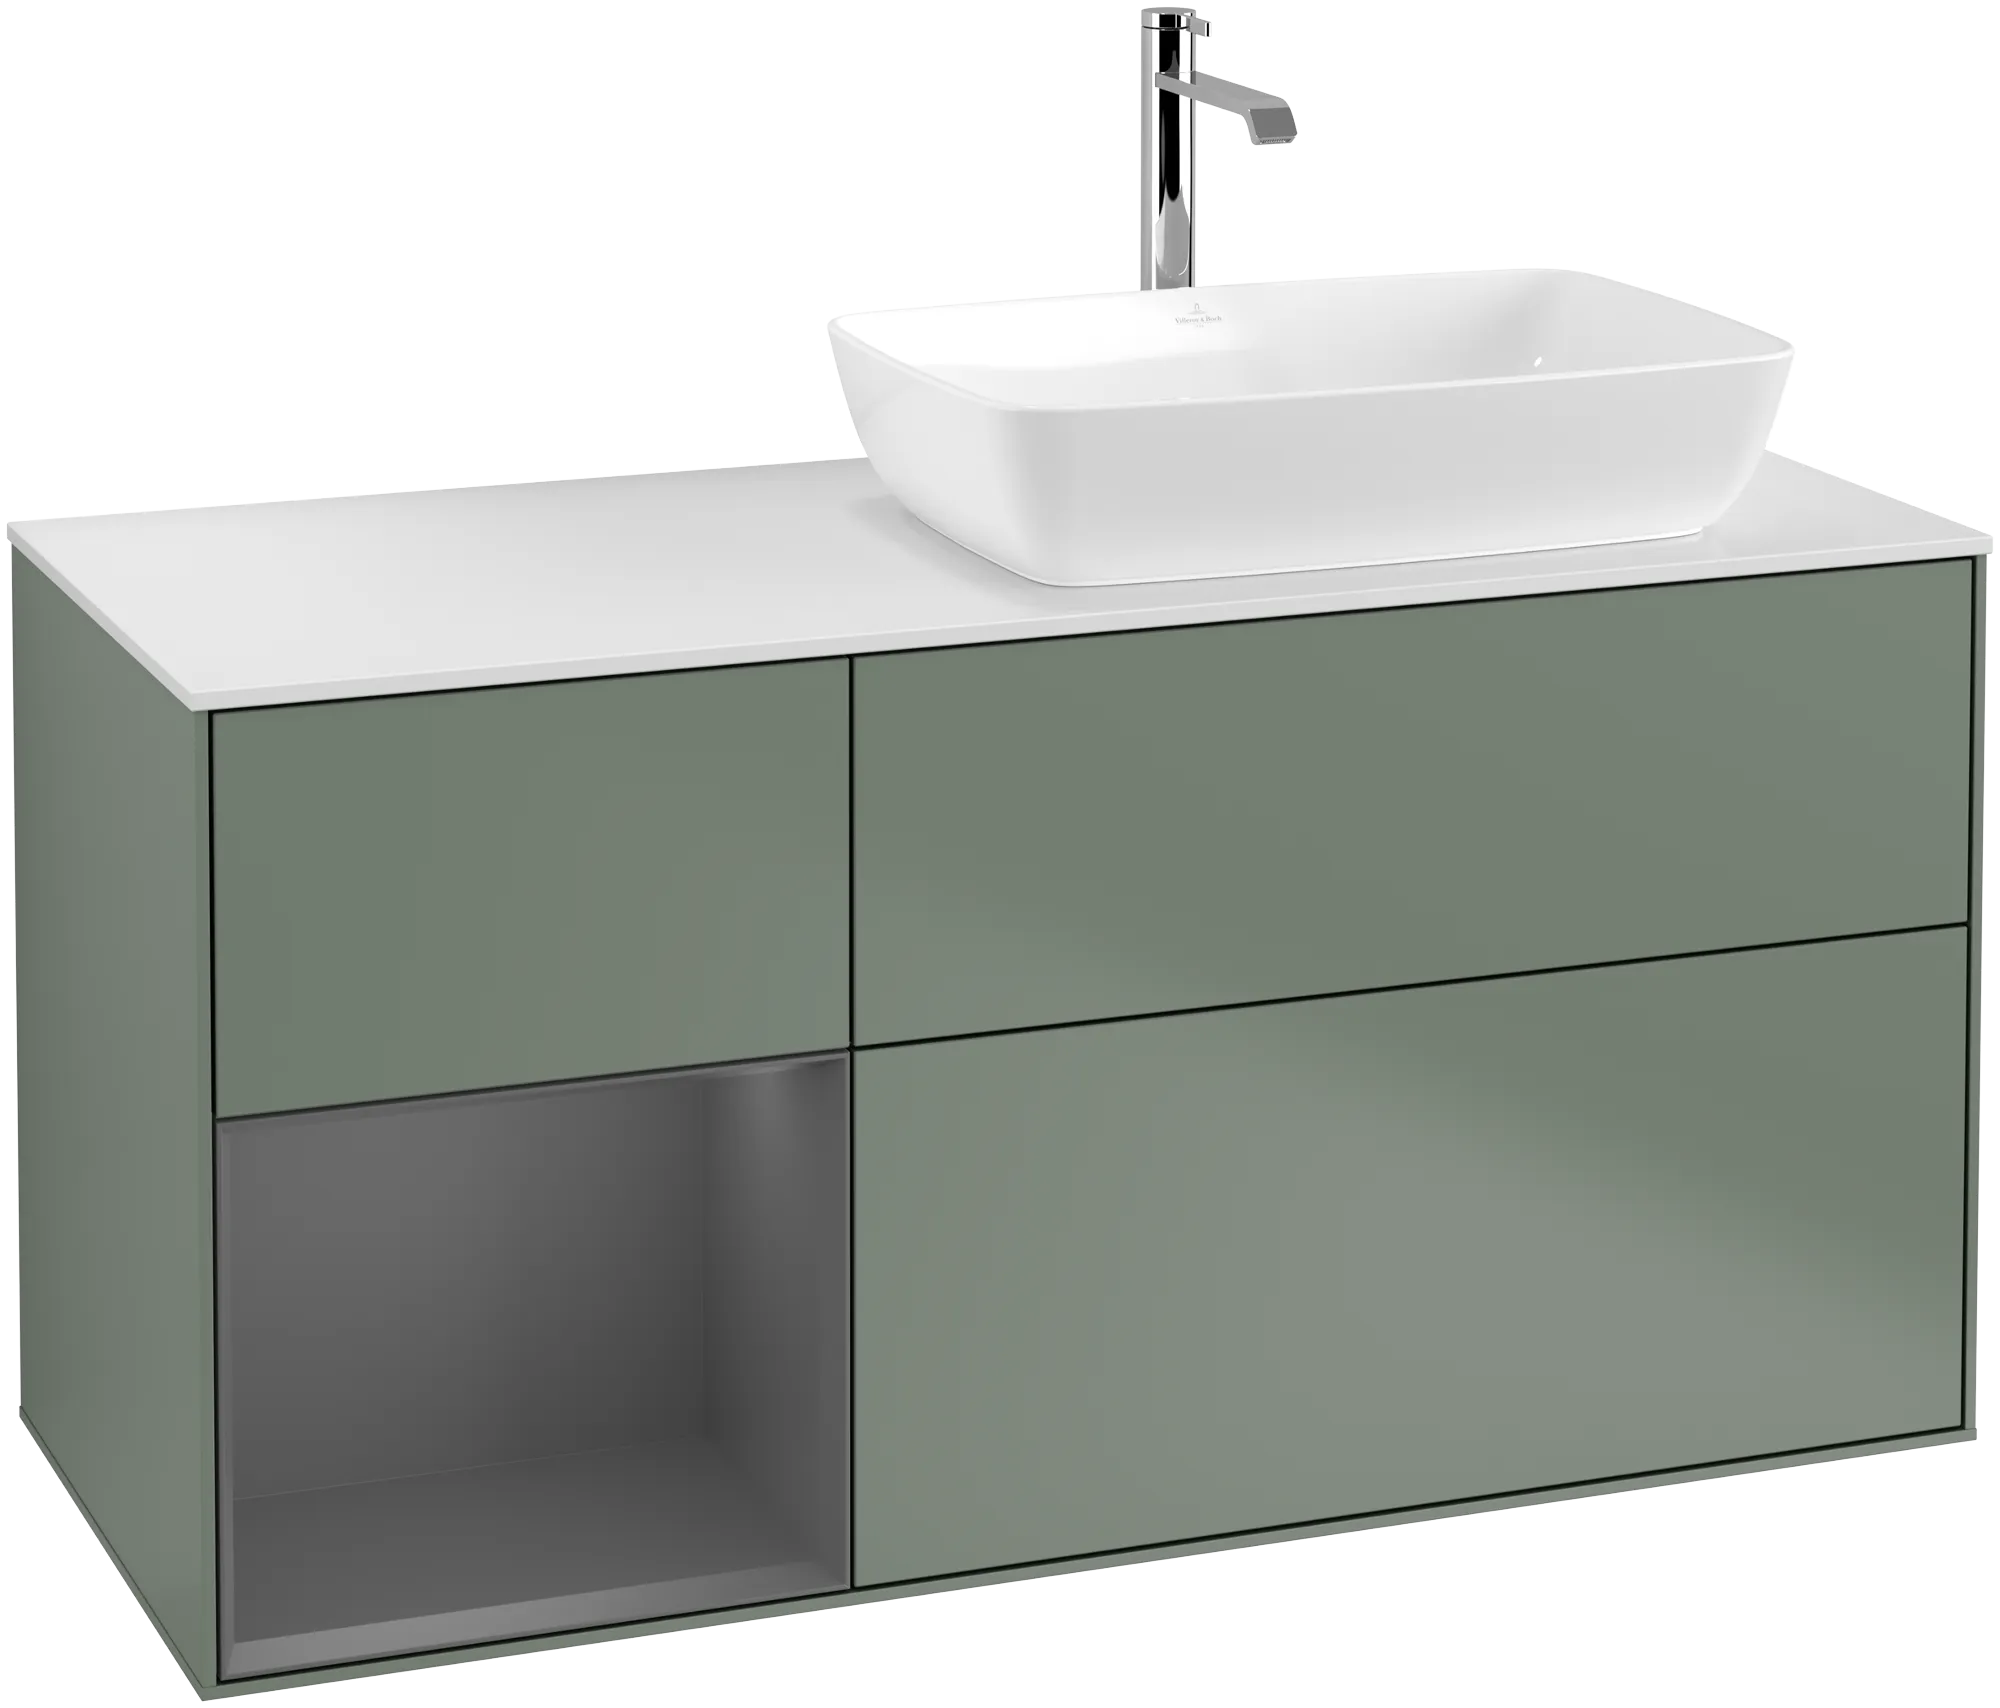 Obrázek VILLEROY BOCH Finion Vanity unit, with lighting, 3 pull-out compartments, 1200 x 603 x 501 mm, Olive Matt Lacquer / Anthracite Matt Lacquer / Glass White Matt #G801GKGM